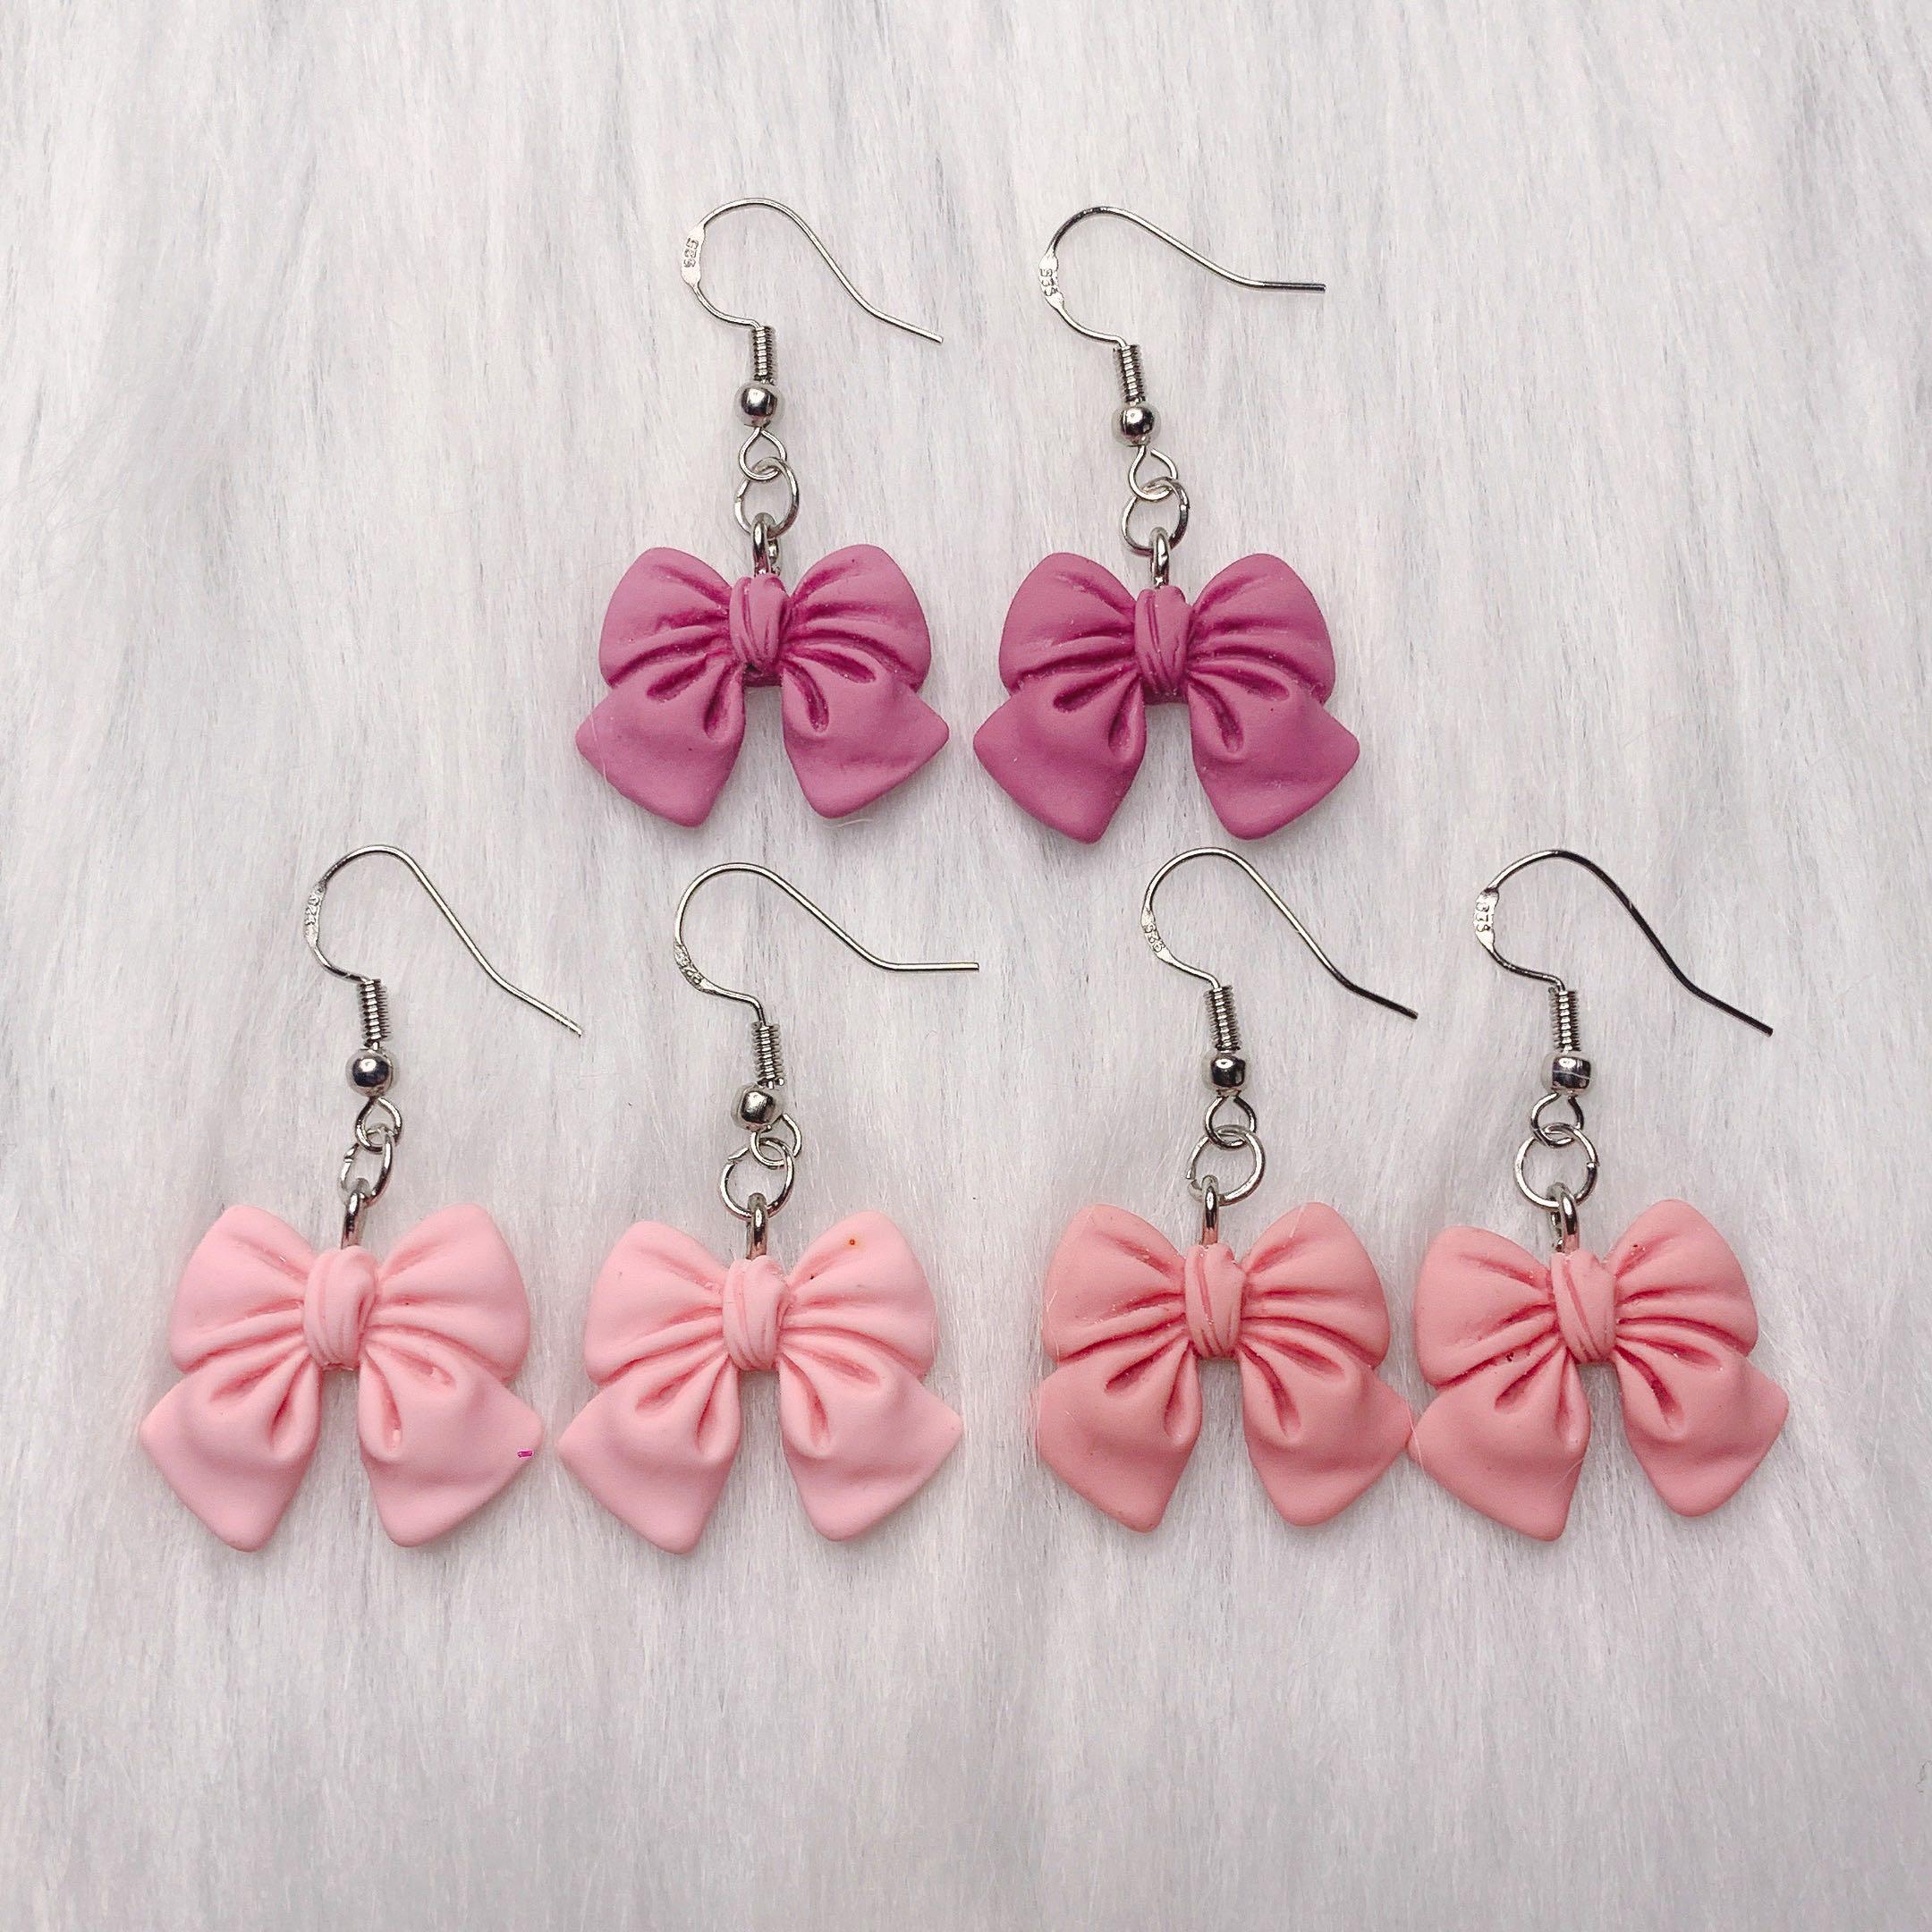 Sister Jane Pirouette Bow Satin and Faux Pearl Earrings | TheHut.com